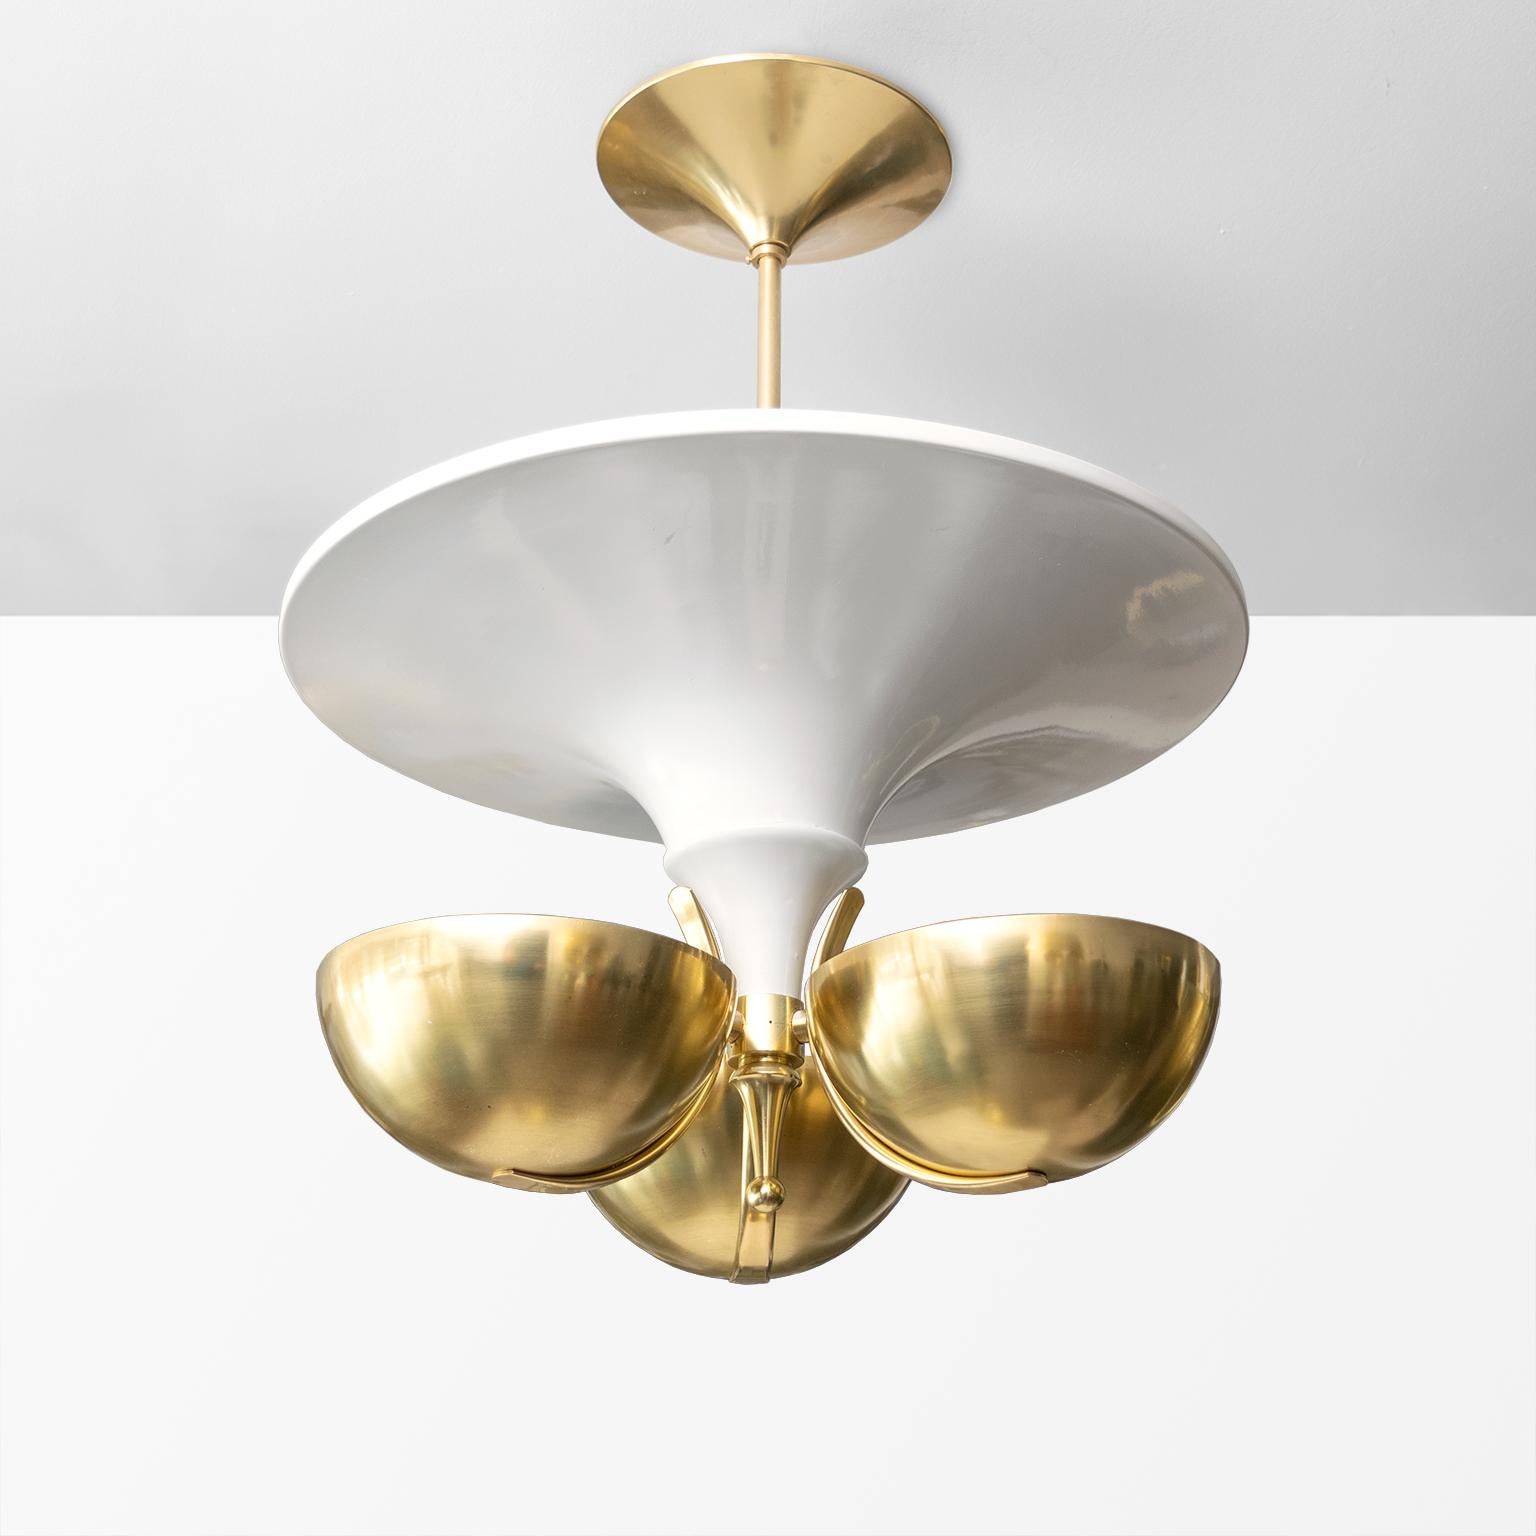 Painted Scandinavian Modern Swedish Pendant with Three Brass Shades and Large Reflector 